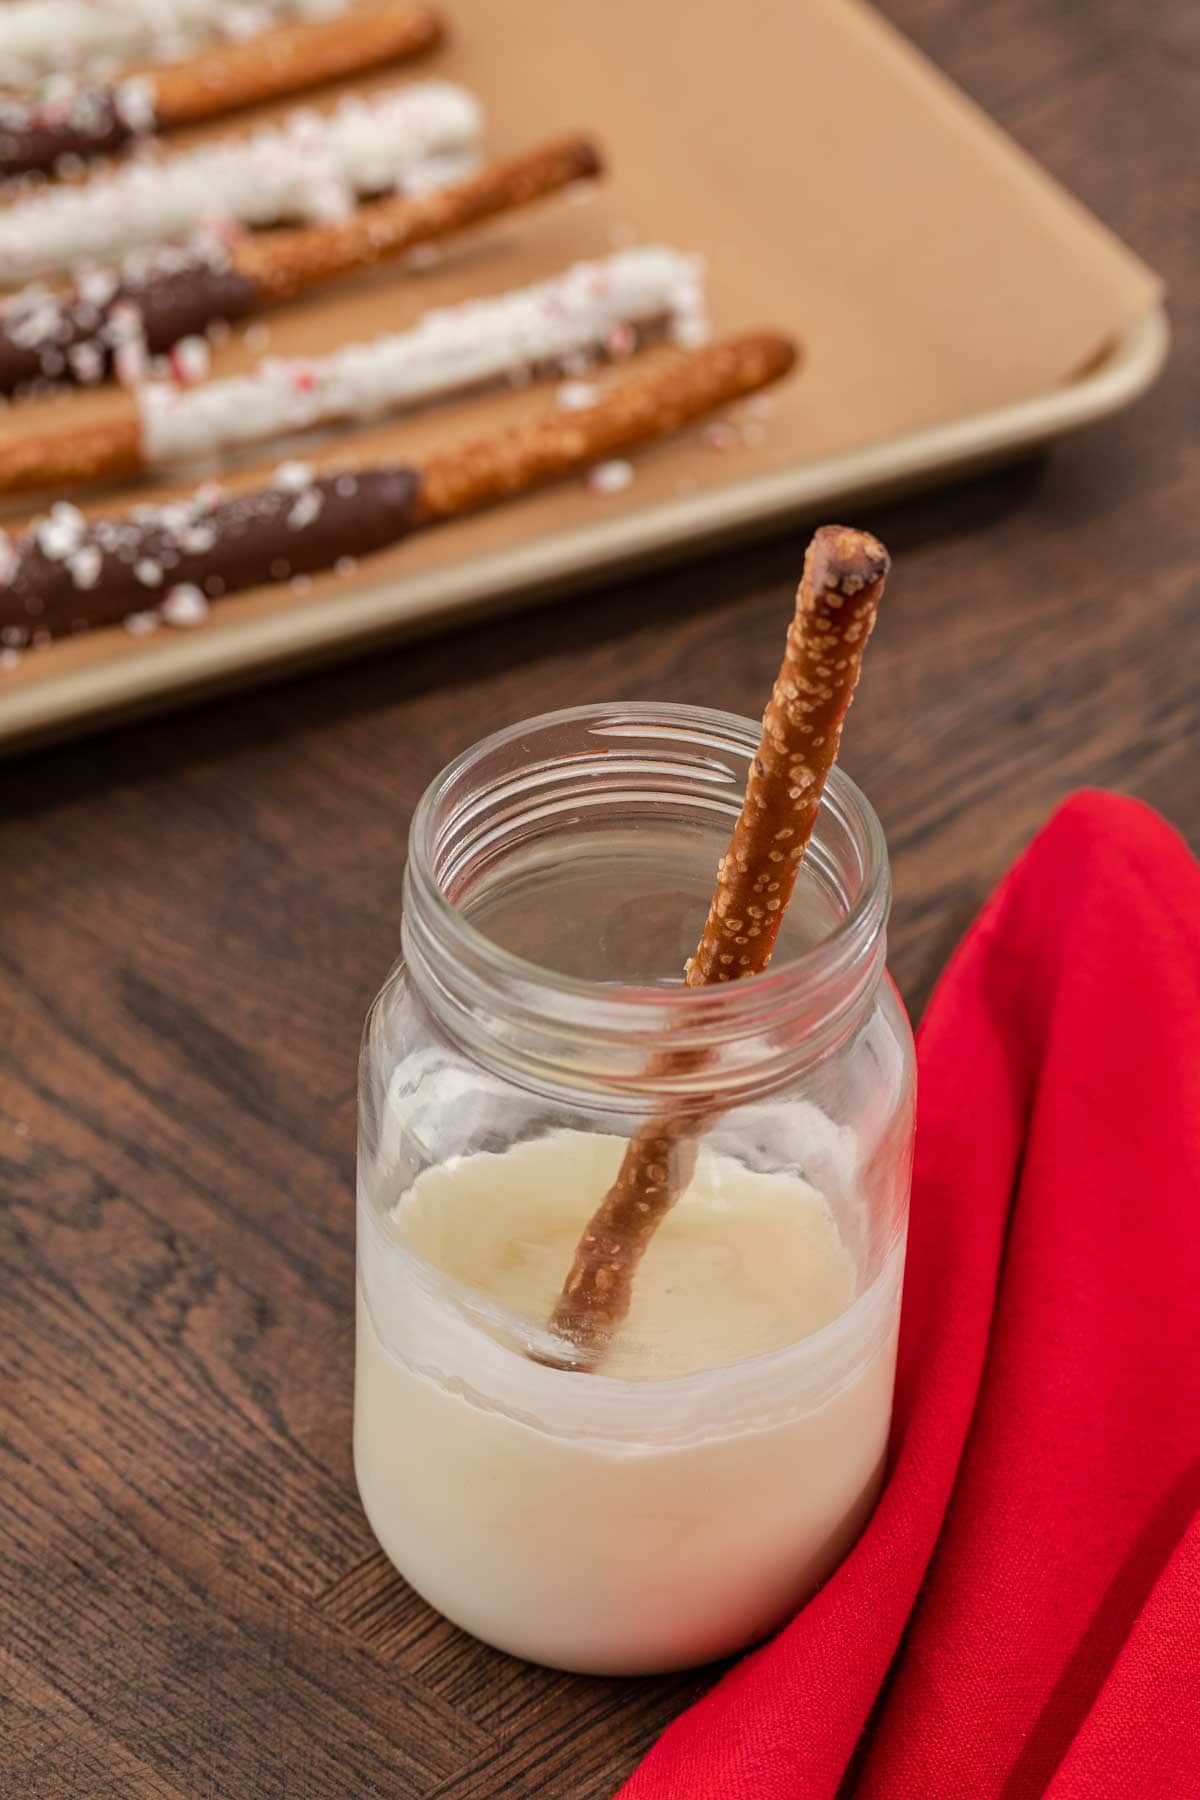 Peppermint Bark Pretzels white chocolate melted in jar with pretzel rod